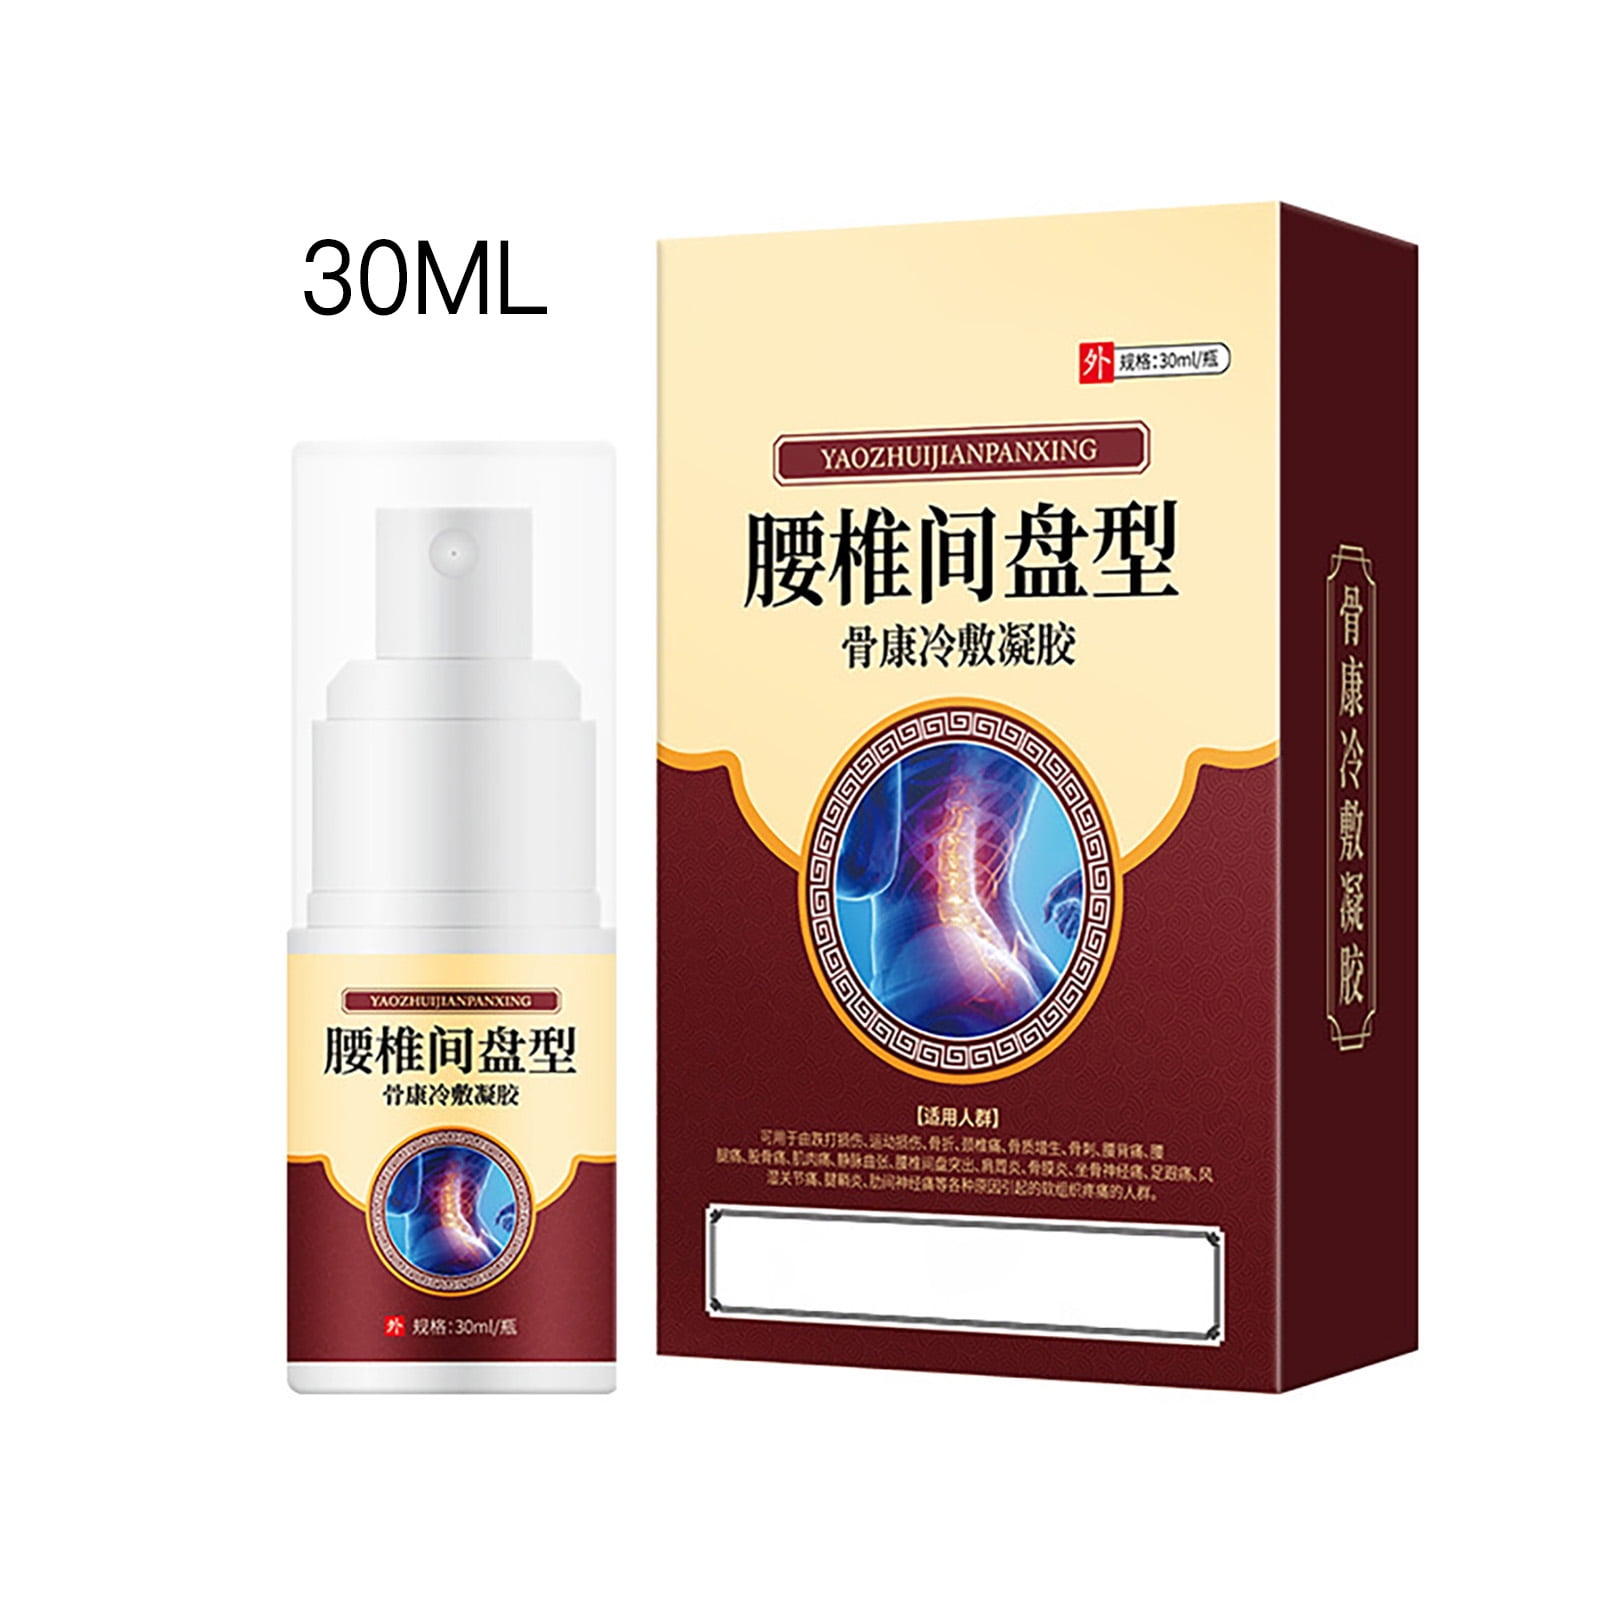 3 pieces—35ml Lumbar Cold Gel Spray, Back Pain Relief Products